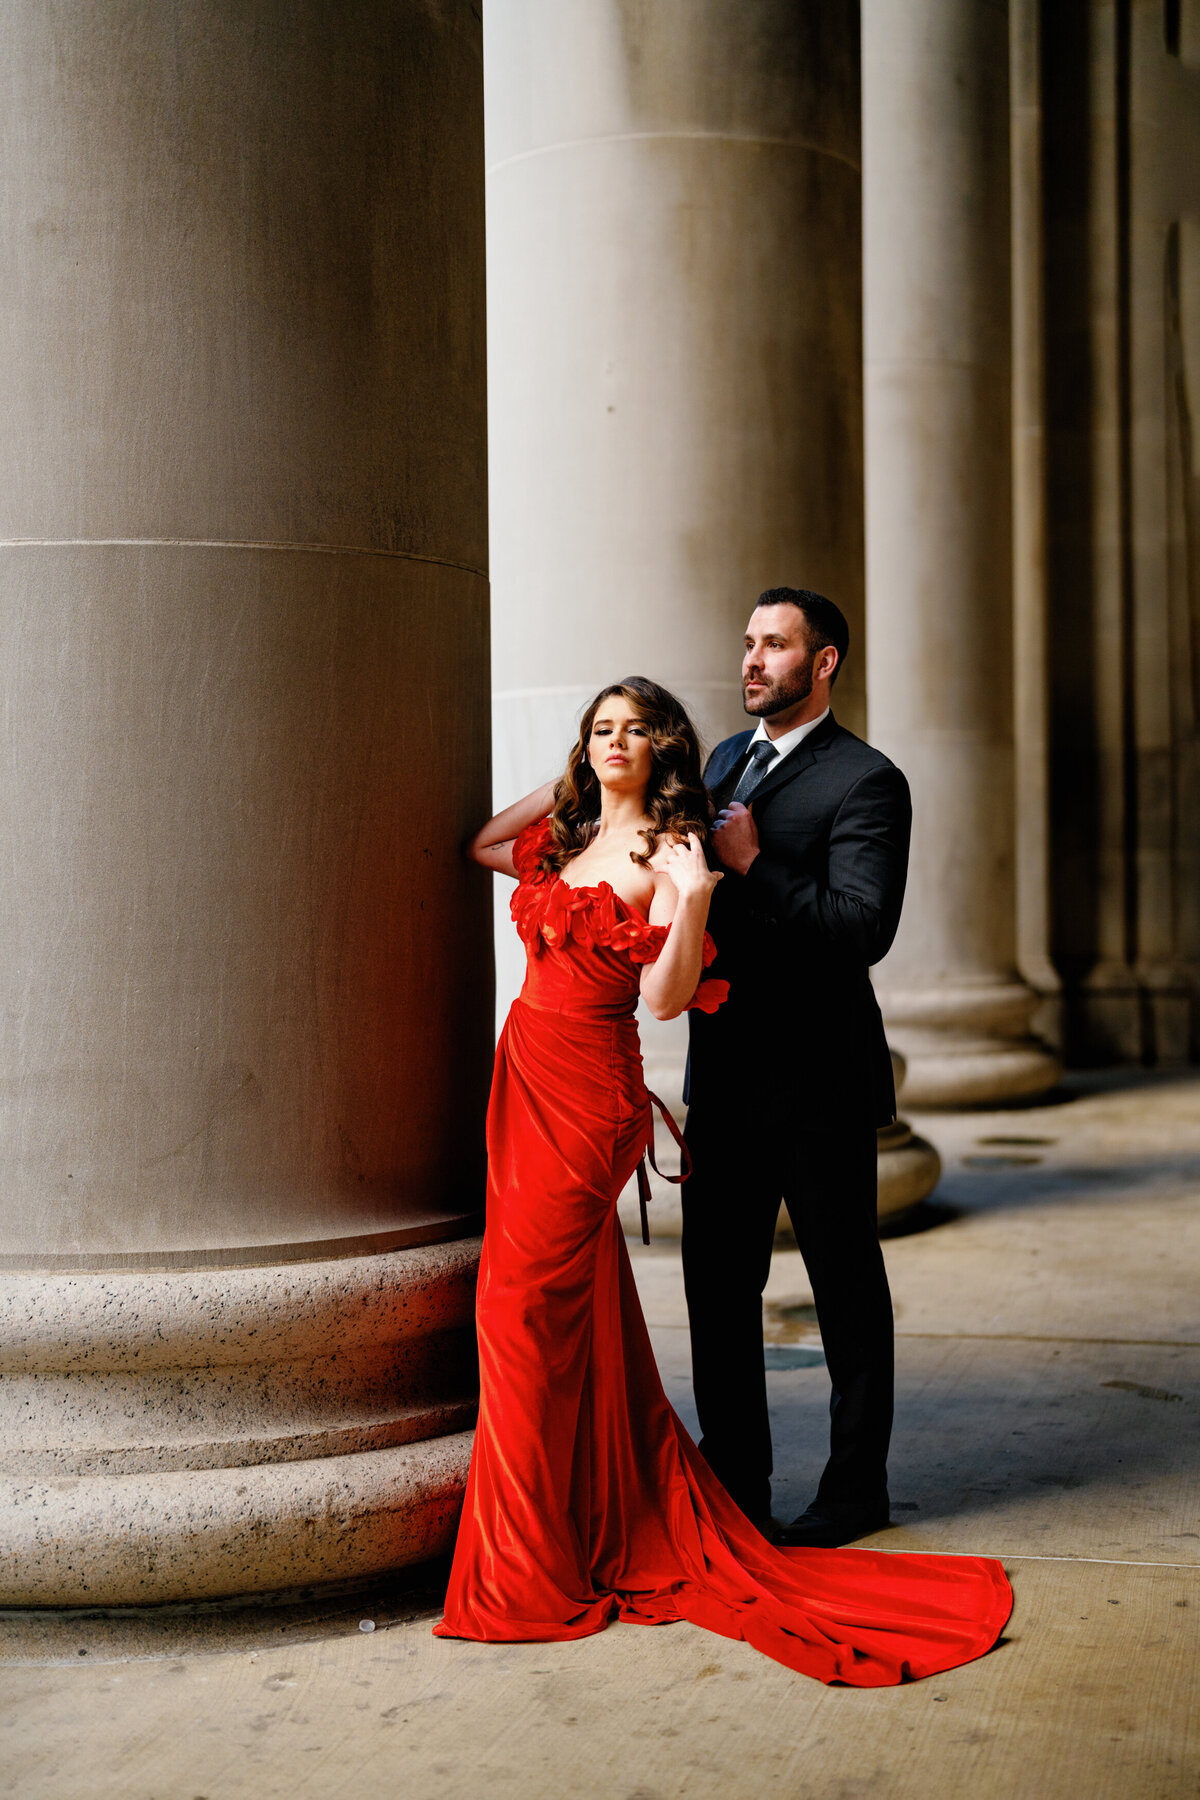 Aspen-Avenue-Chicago-Wedding-Photographer-Union-Station-Chicago-Theater-Engagement-Session-Timeless-Romantic-Red-Dress-Editorial-Stemming-From-Love-Bry-Jean-Artistry-The-Bridal-Collective-True-to-color-Luxury-FAV-67